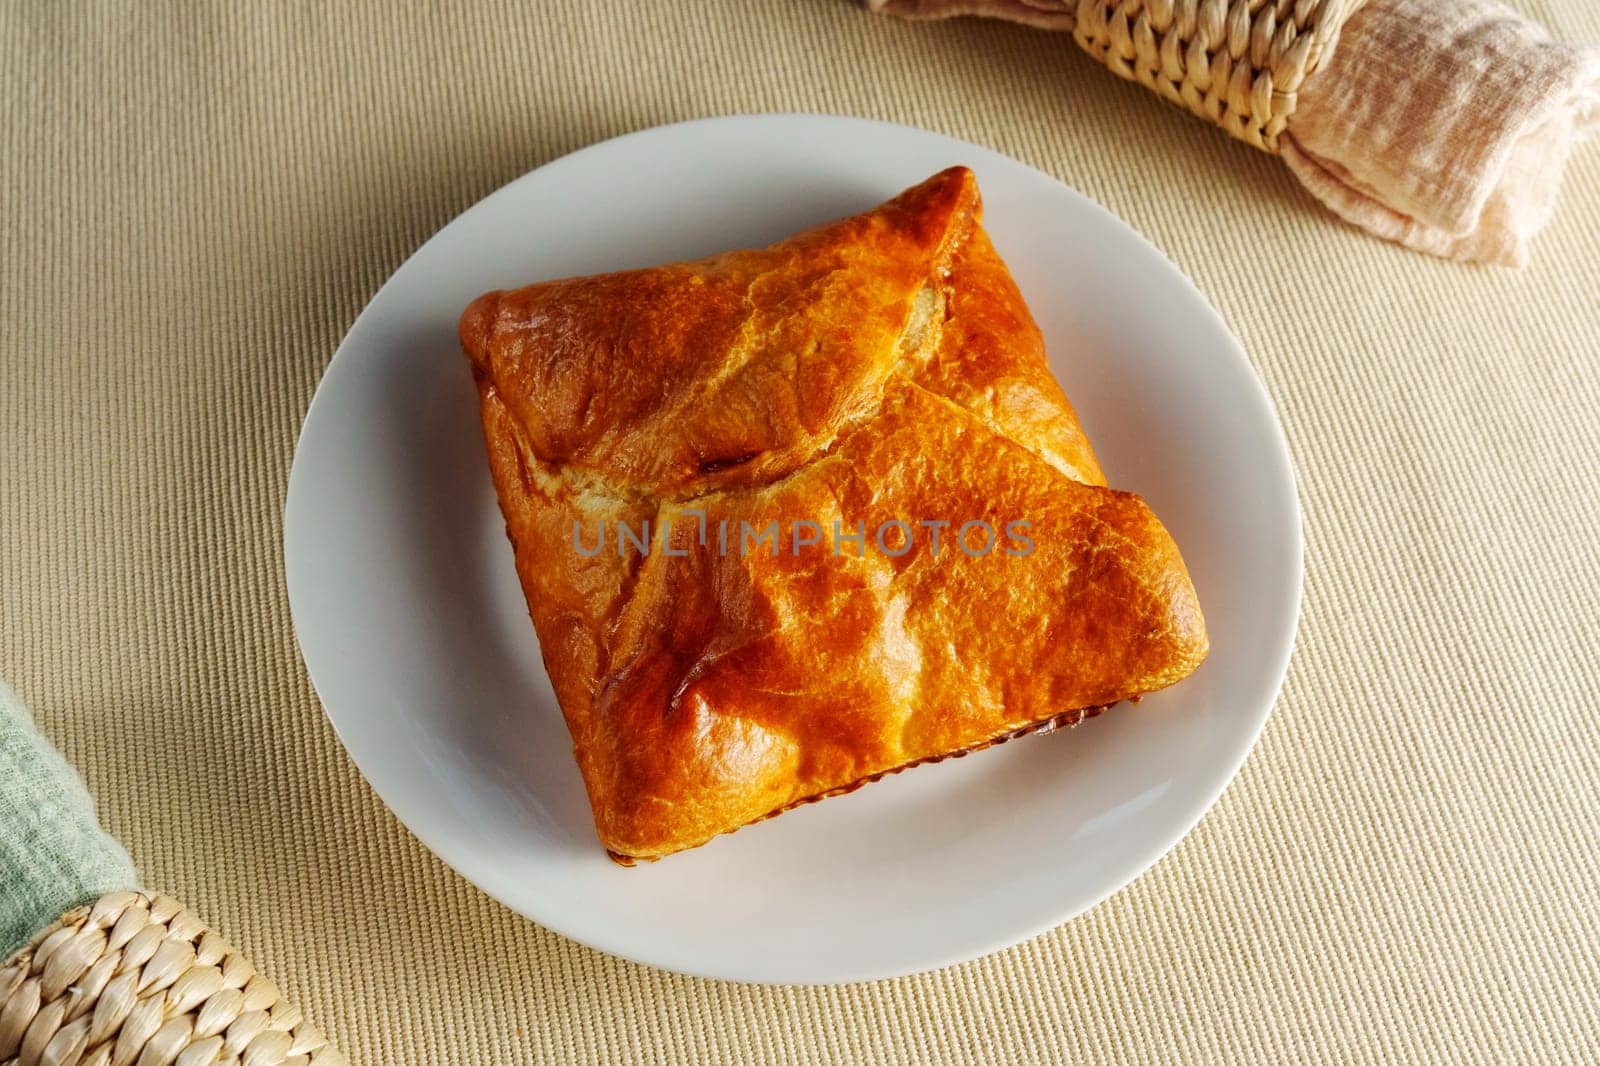 A visually stunning composition featuring a perfectly baked puff pastry adorning a pristine white plate.